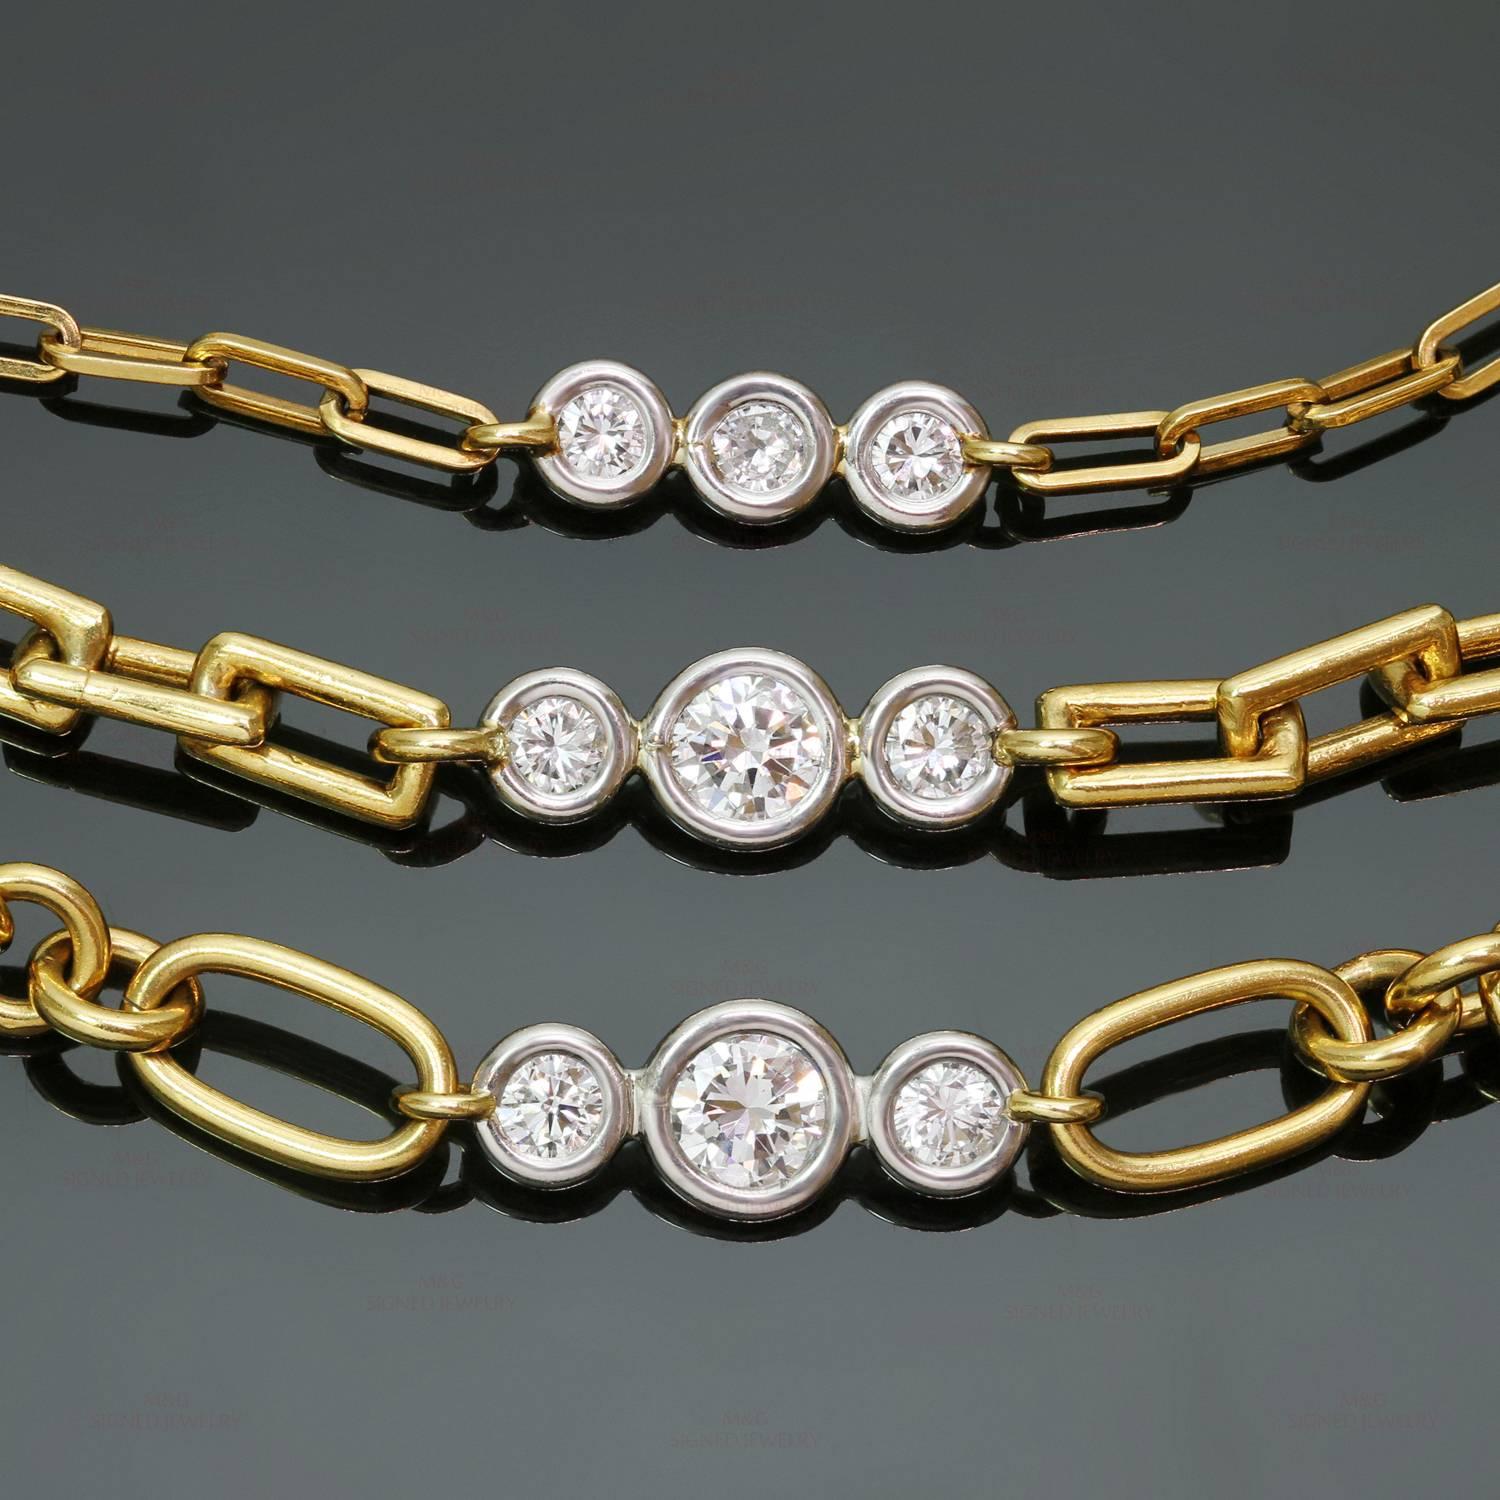 This fabulous and rare set of 3 David Webb chains features a multi-shaped link design crafted in 18k yellow gold and accented with brilliant-cut round diamonds of an estimated 6.50 carats set in platinum. Made in United States circa 1990s.